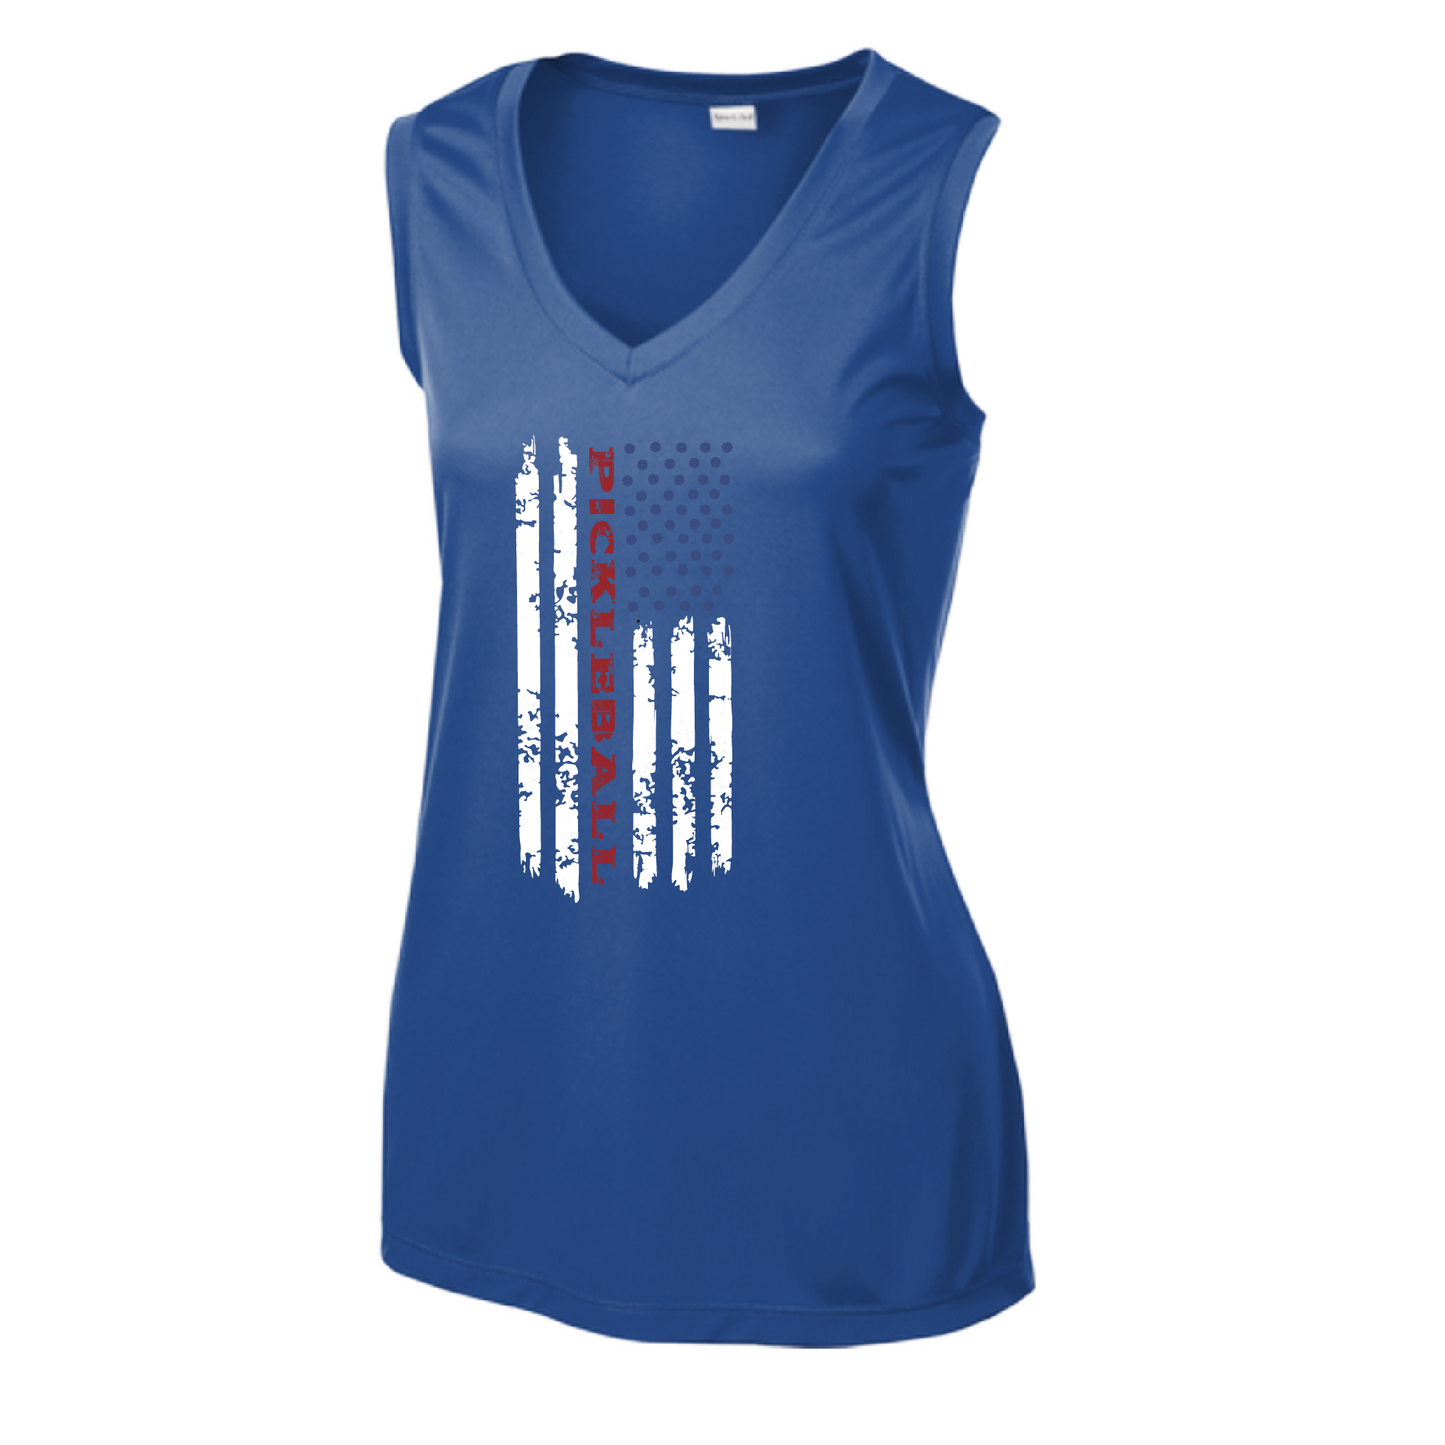 Pickleball Design: Pickleball Flag Vertical on Front or Back of Shirt  Women's Style: Sleeveless V-Neck Tank  Turn up the volume in this Women's shirt with its perfect mix of softness and attitude. Material is ultra-comfortable with moisture wicking properties and tri-blend softness. PosiCharge technology locks in color. Highly breathable and lightweight.